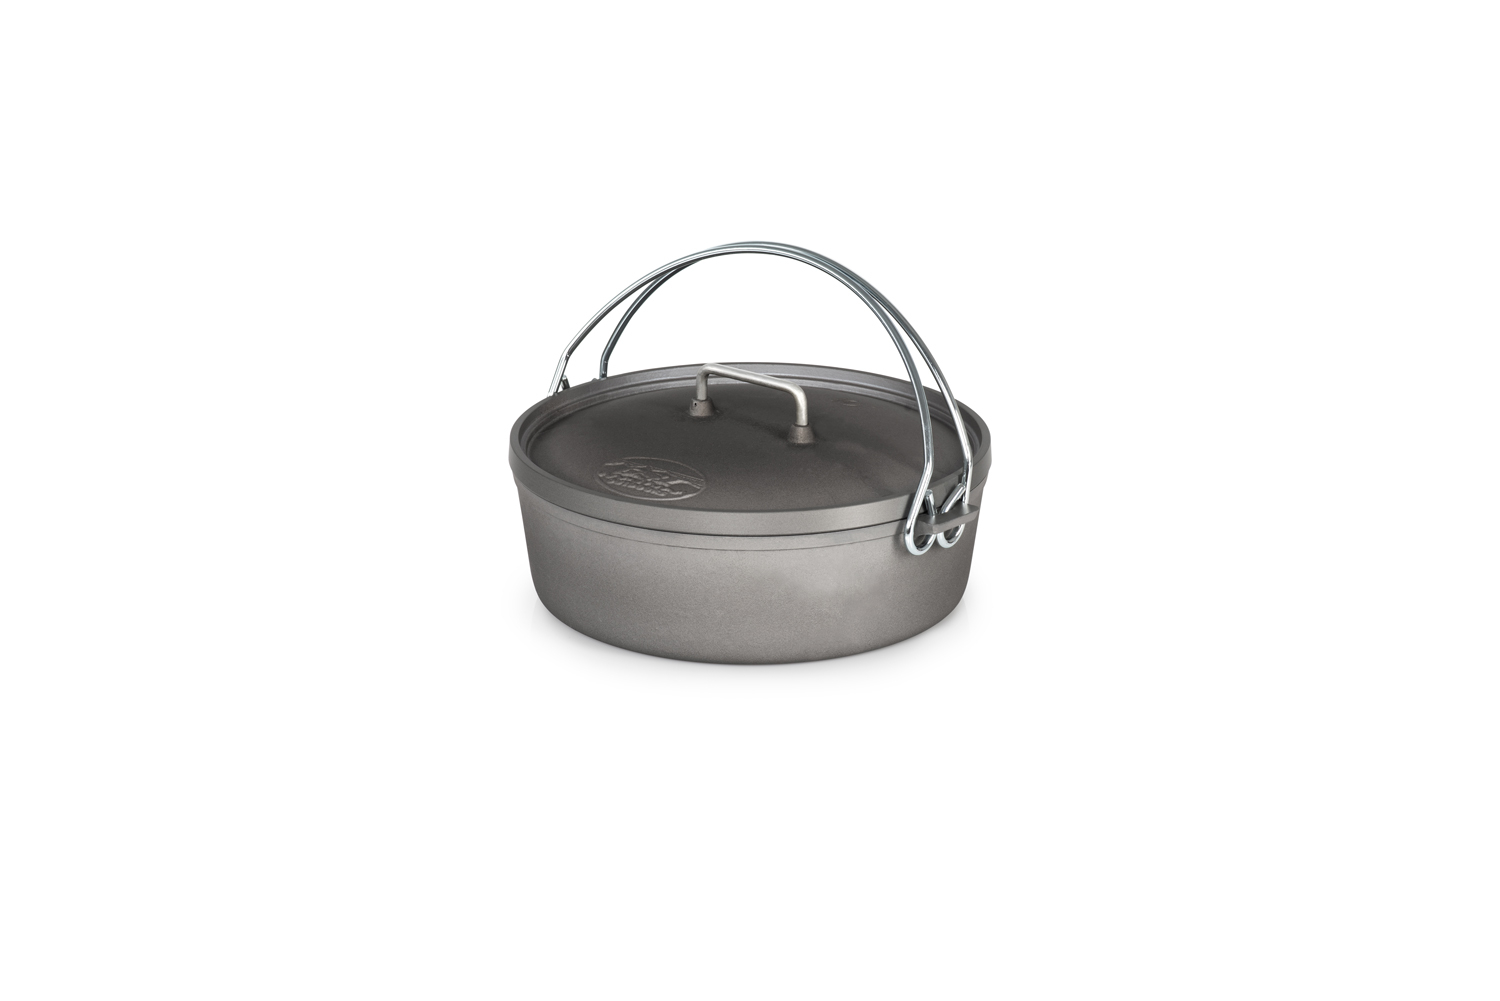 https://retailobjects.scoutshop.org/media/catalog/product/cache/15846fcd7c7438adaa15ad763c45b358/6/5/656236_hard-anodized-10-dutch-oven_50410_1.jpg